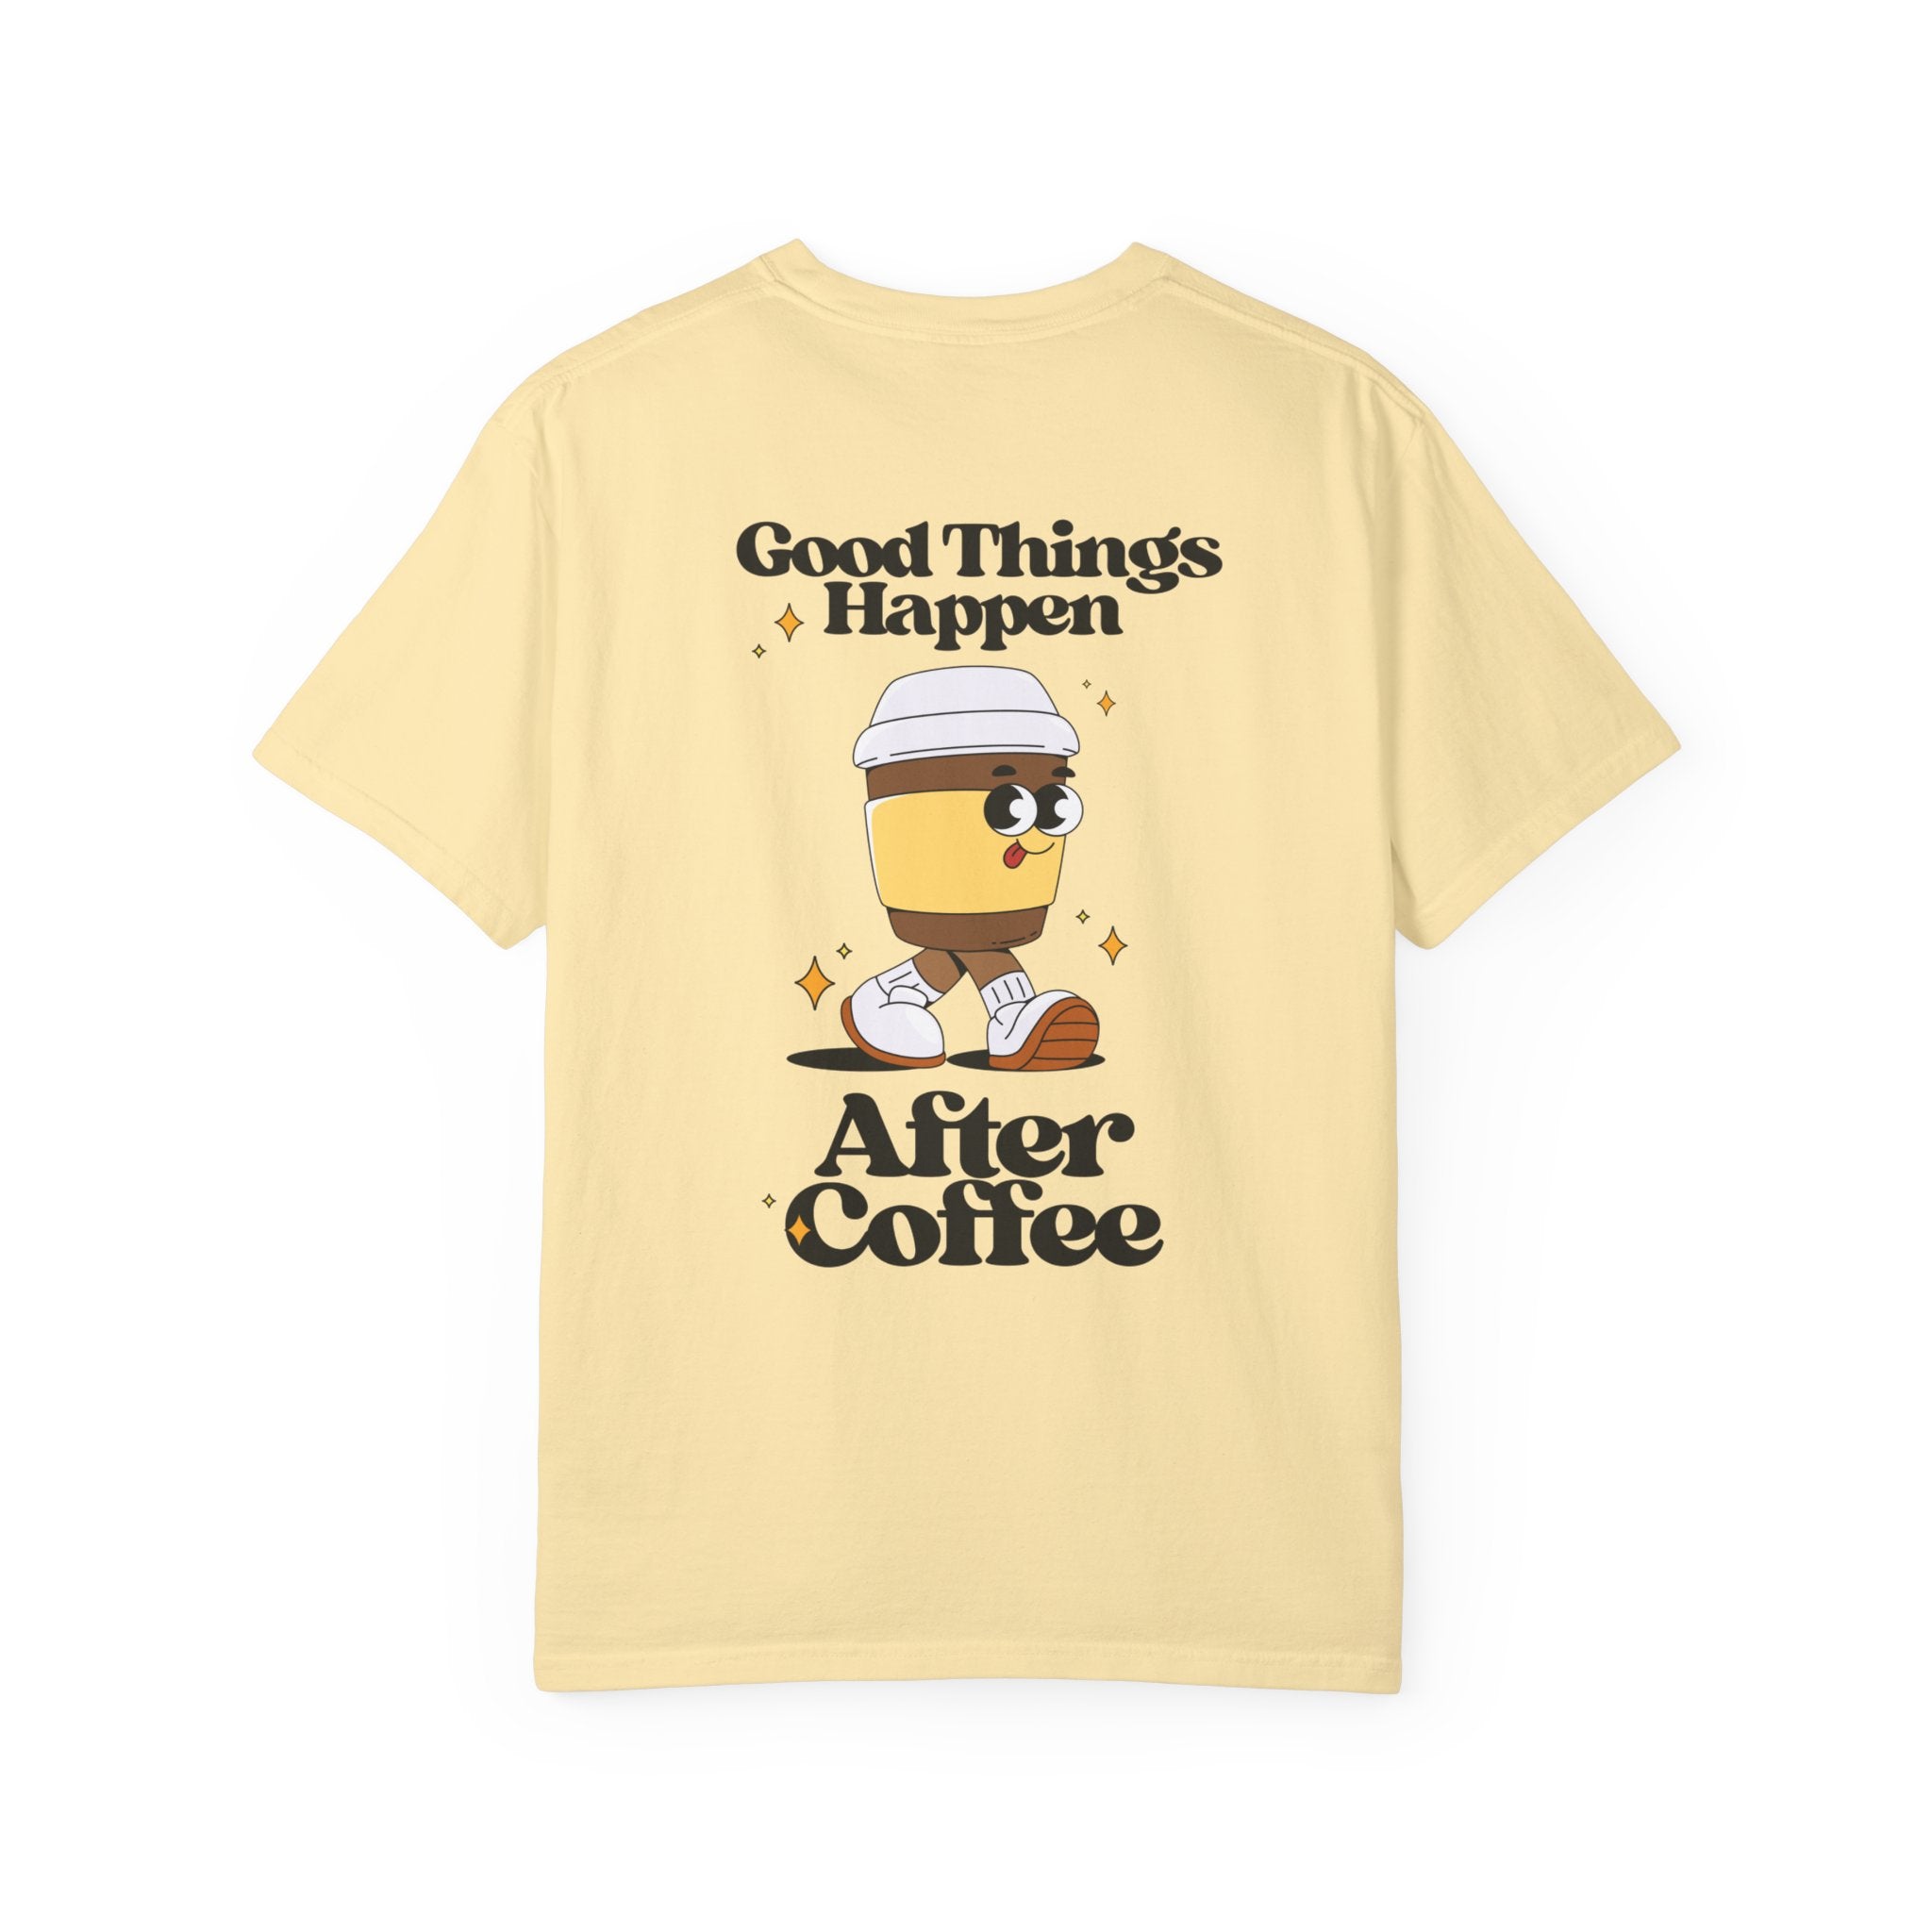 Good Things Happen After Coffee Comfort Colors T Shirt